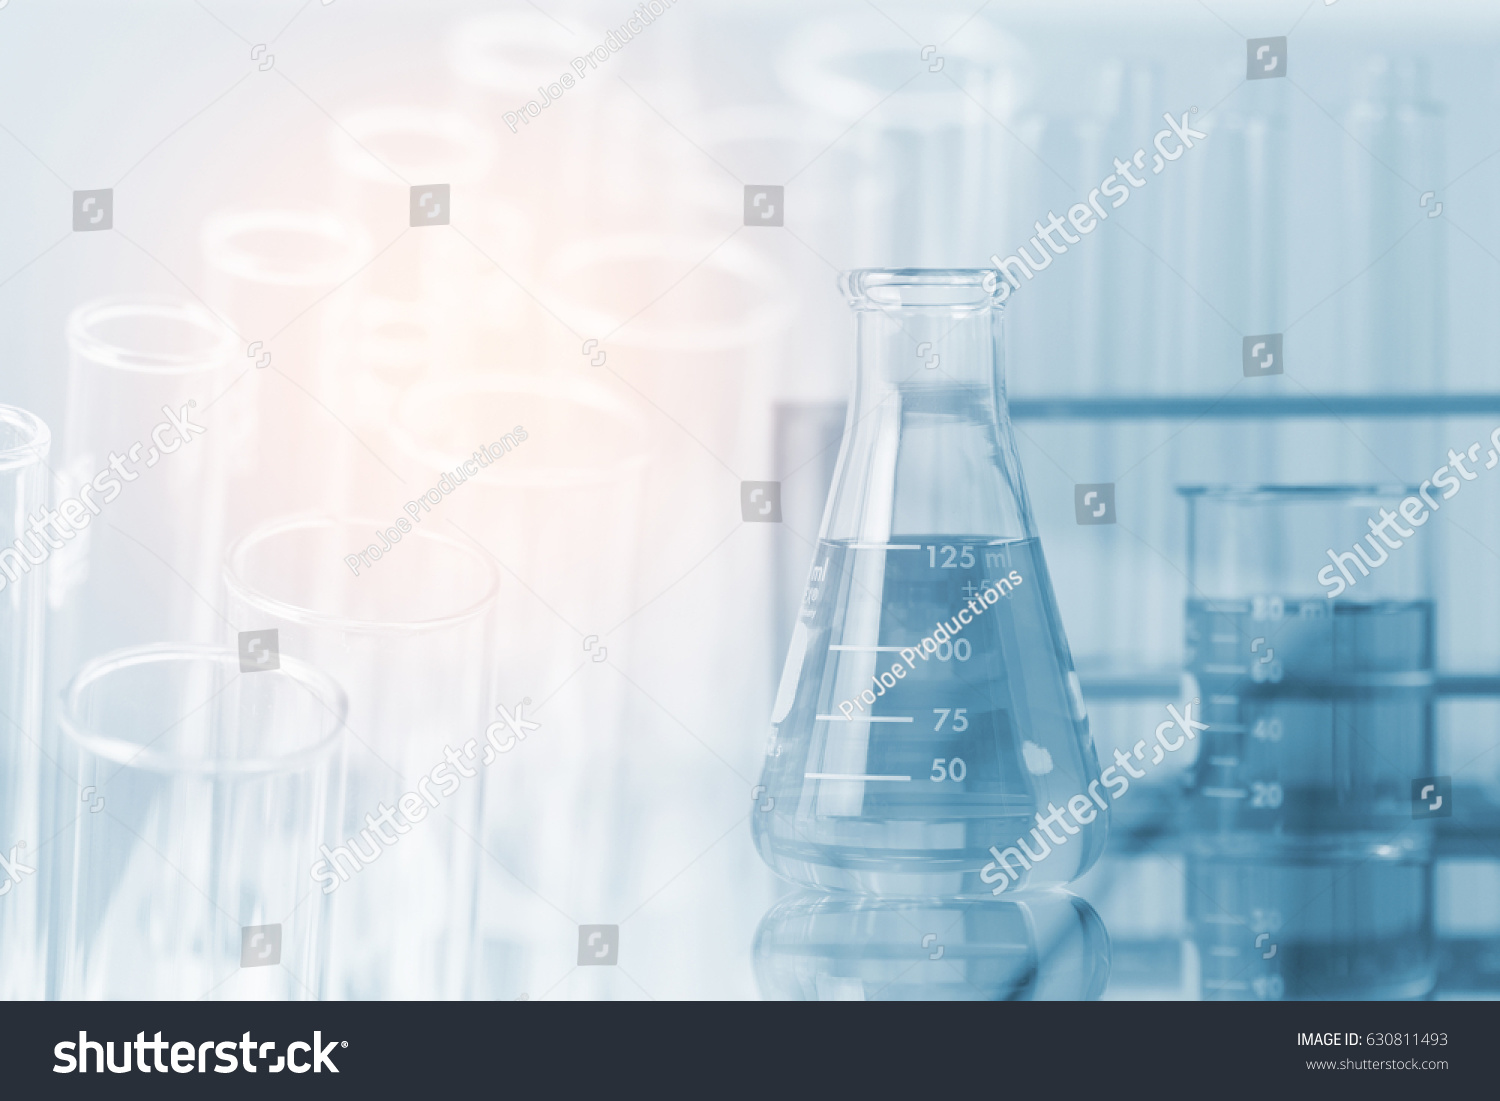 Double exposure of equipment and science experiments ,Laboratory glassware containing chemical liquid, science research,science background and science concept. #630811493